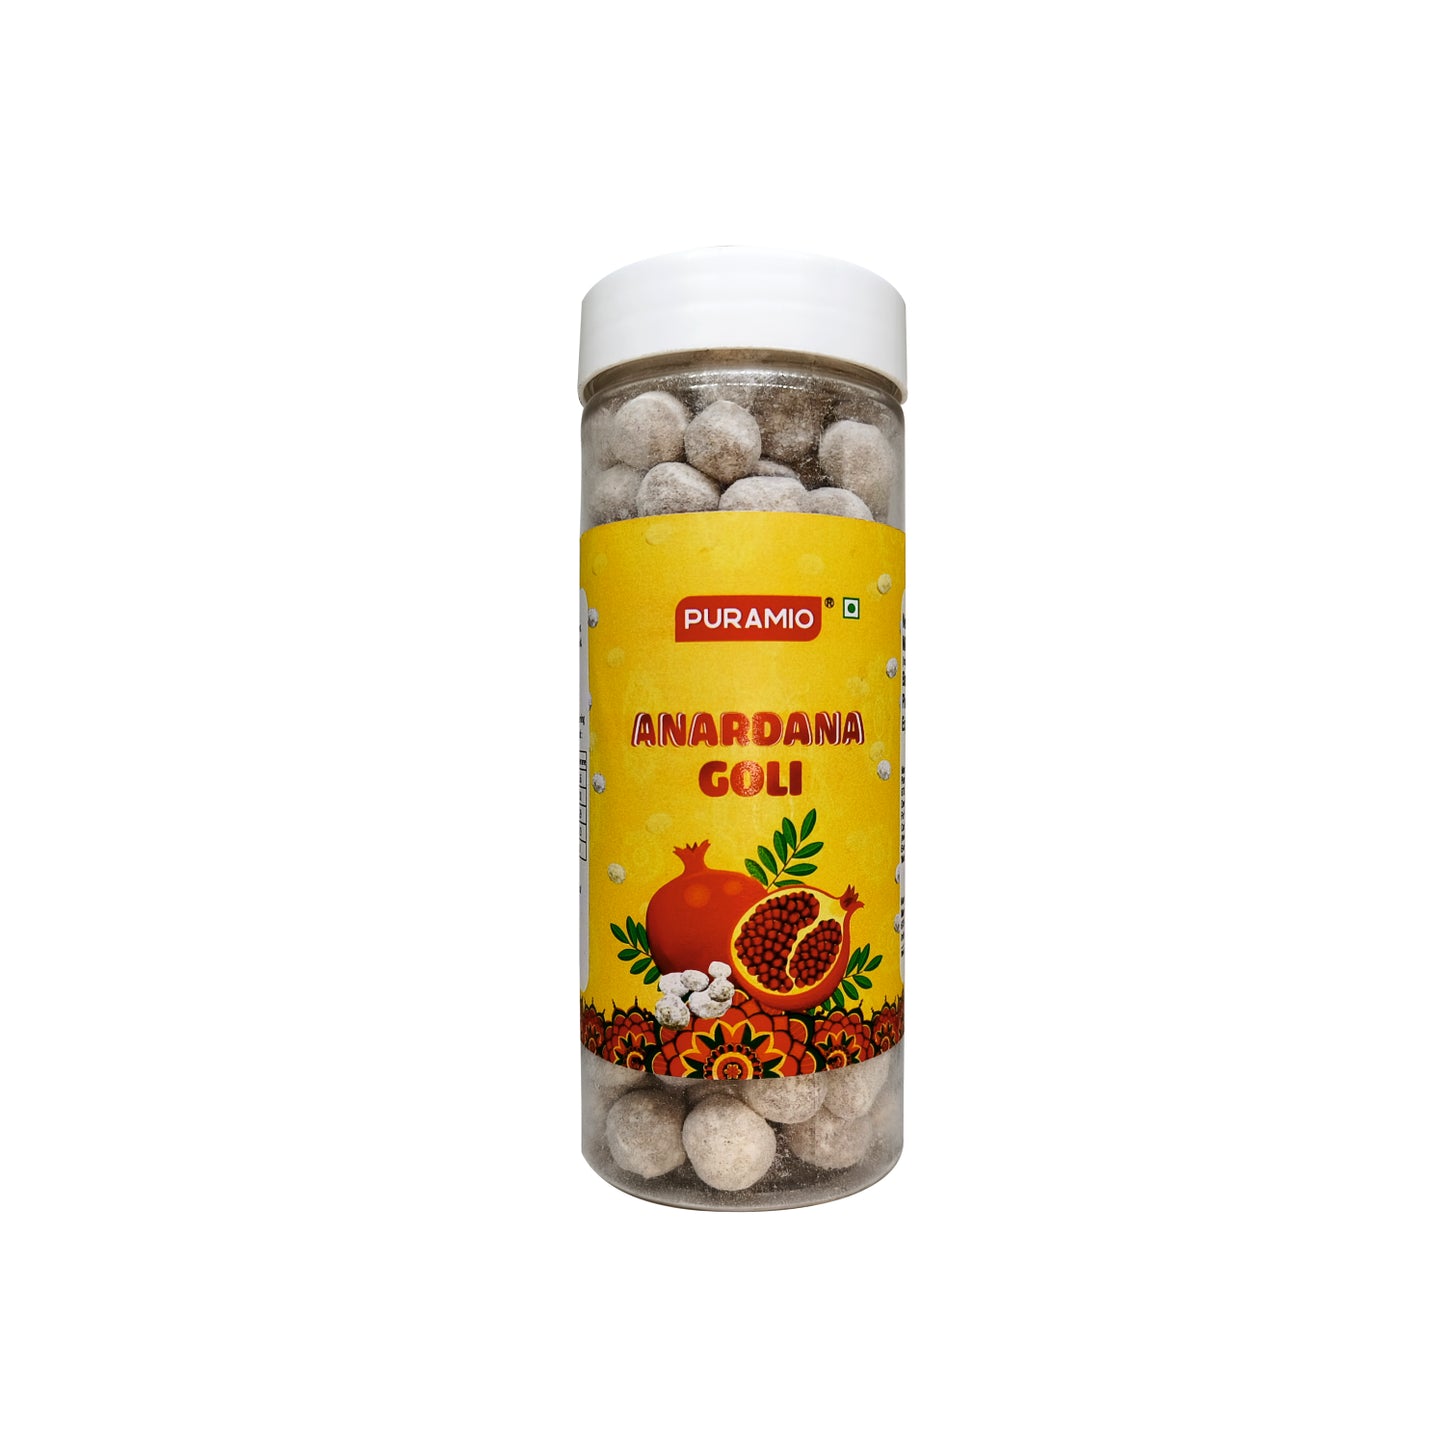 Puramio Anardana Goli | Pure and Premium | Good for Digestion | After Meal Digestive Mouth Freshner, 220g